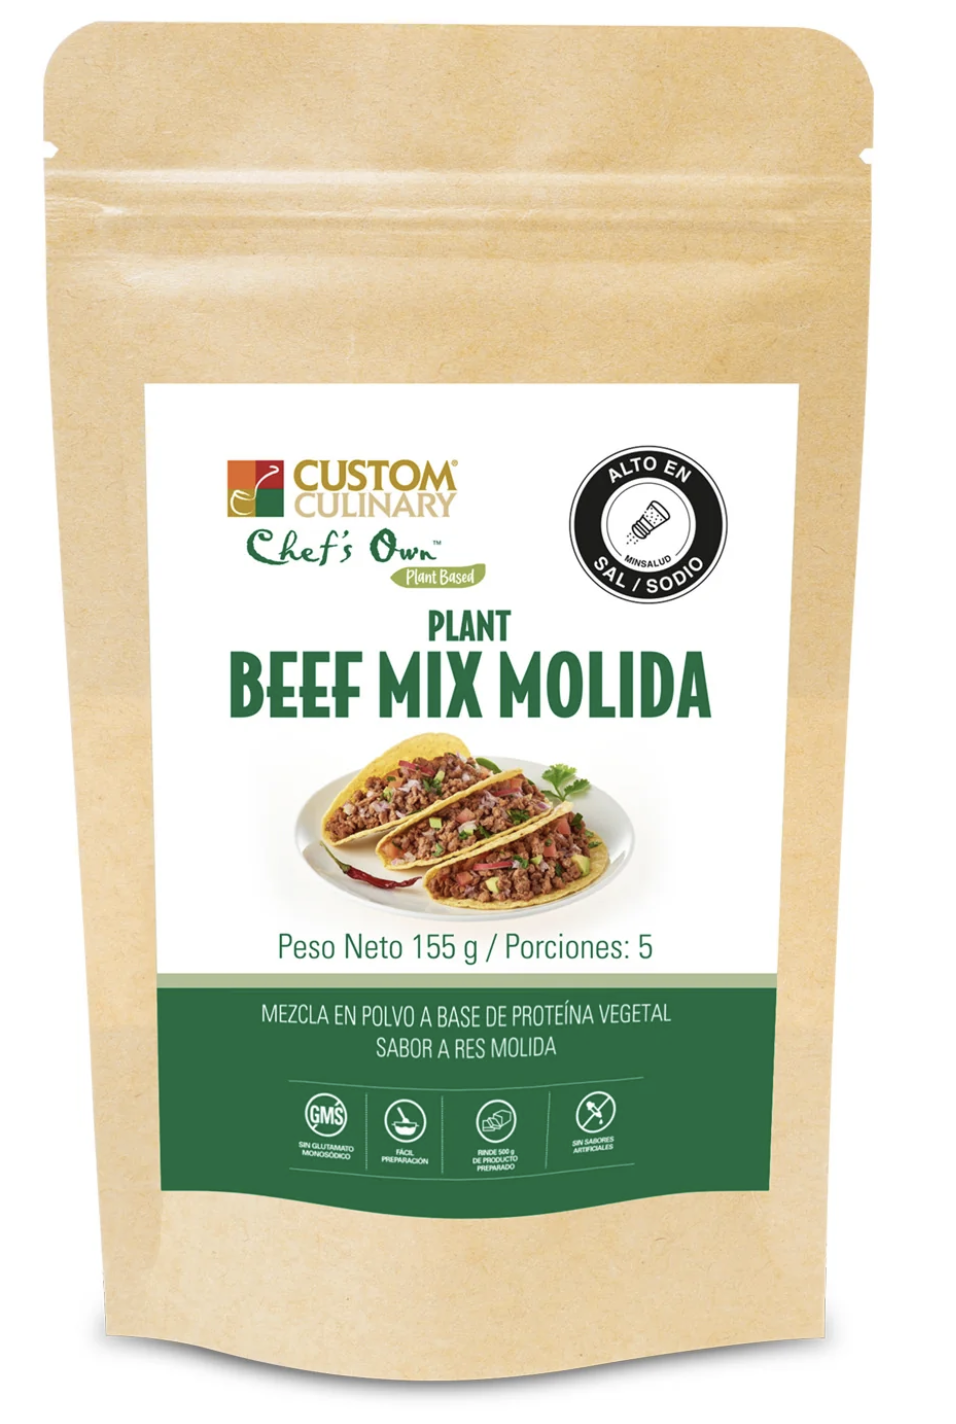 Plant Beef Mix Molida Chefs OwnTM Doypack Zipper Eco 155g